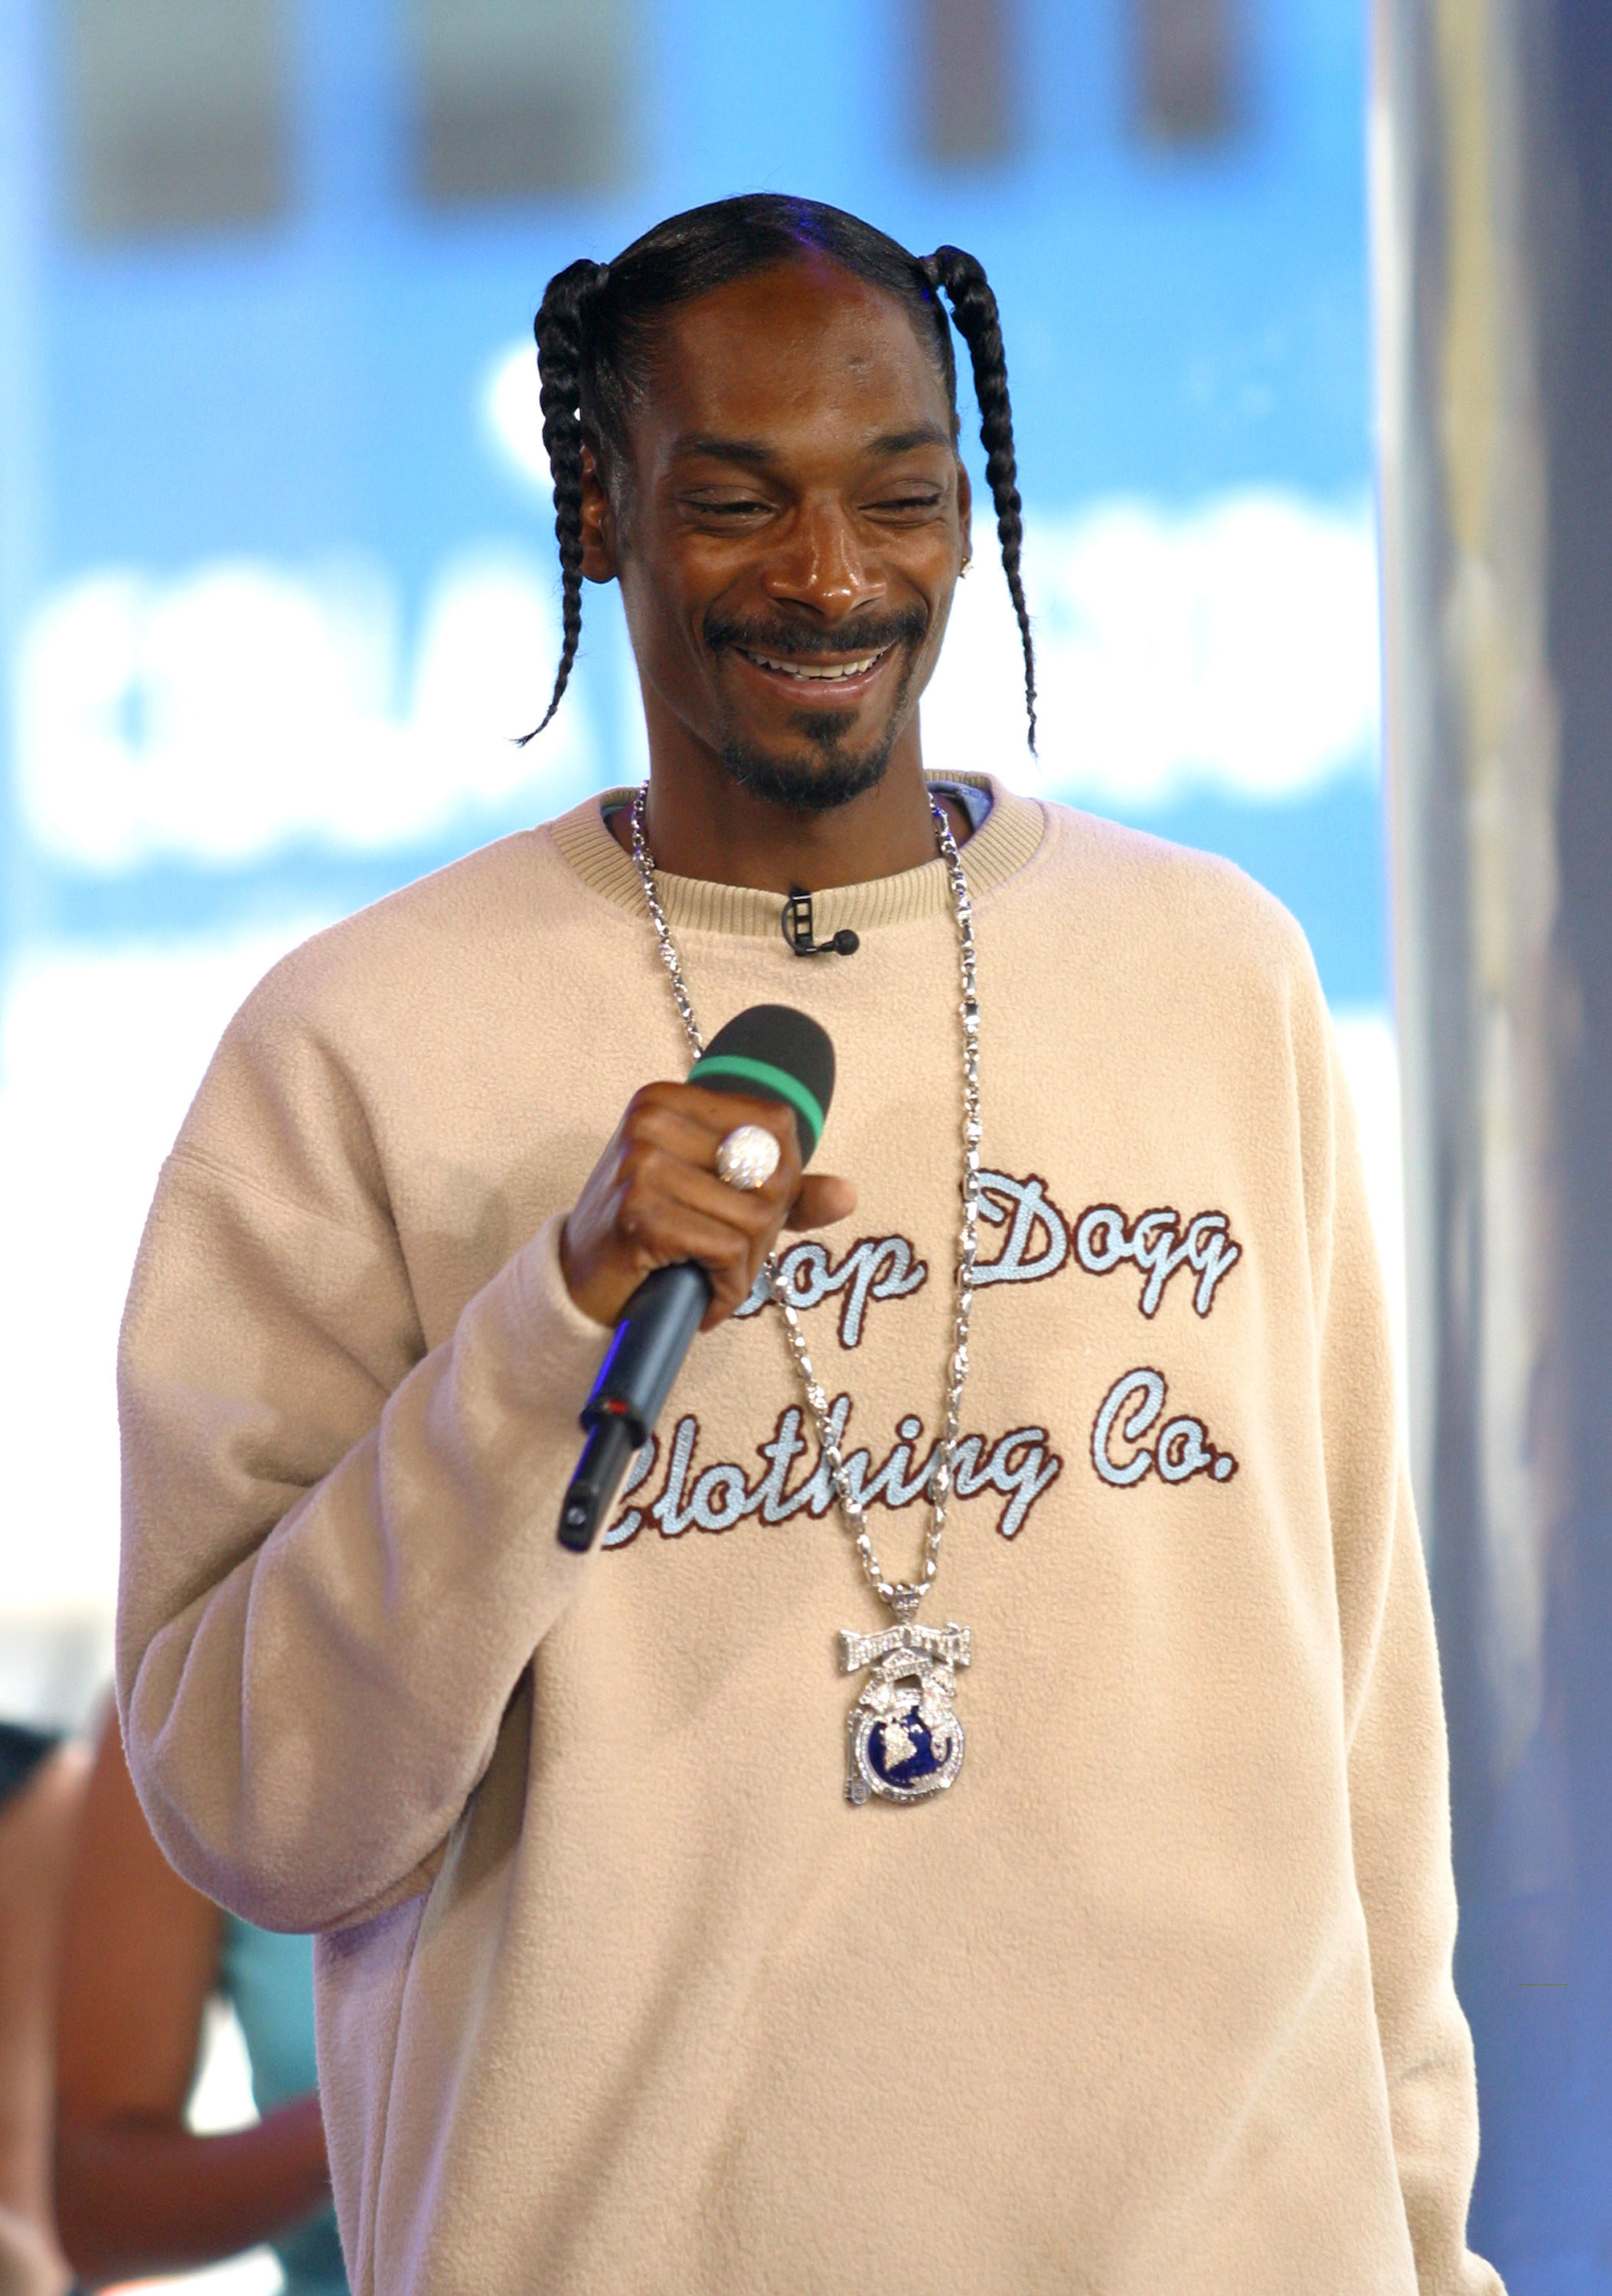 Snoop smiling with a mic